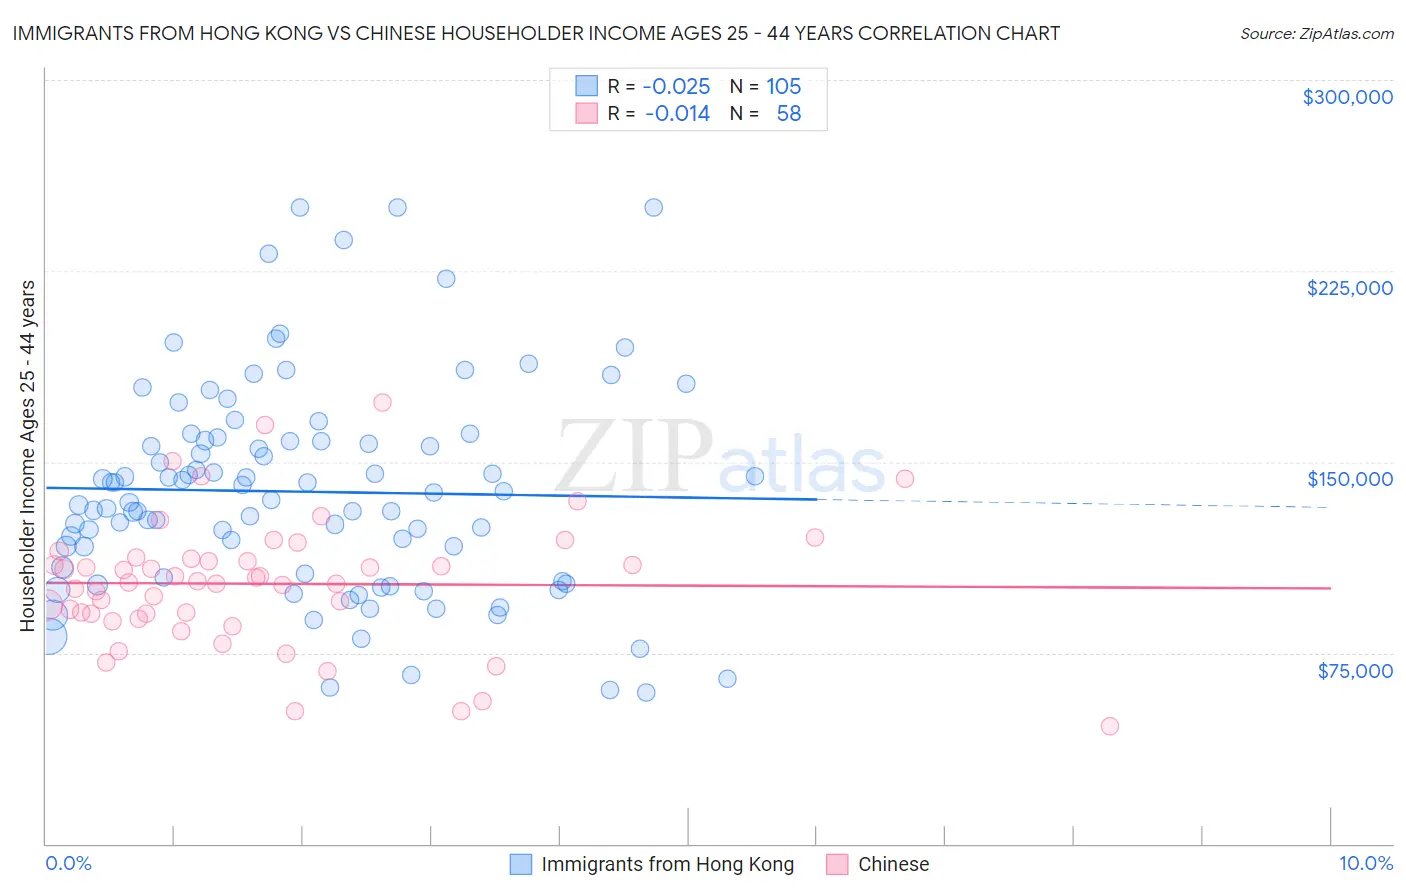 Immigrants from Hong Kong vs Chinese Householder Income Ages 25 - 44 years